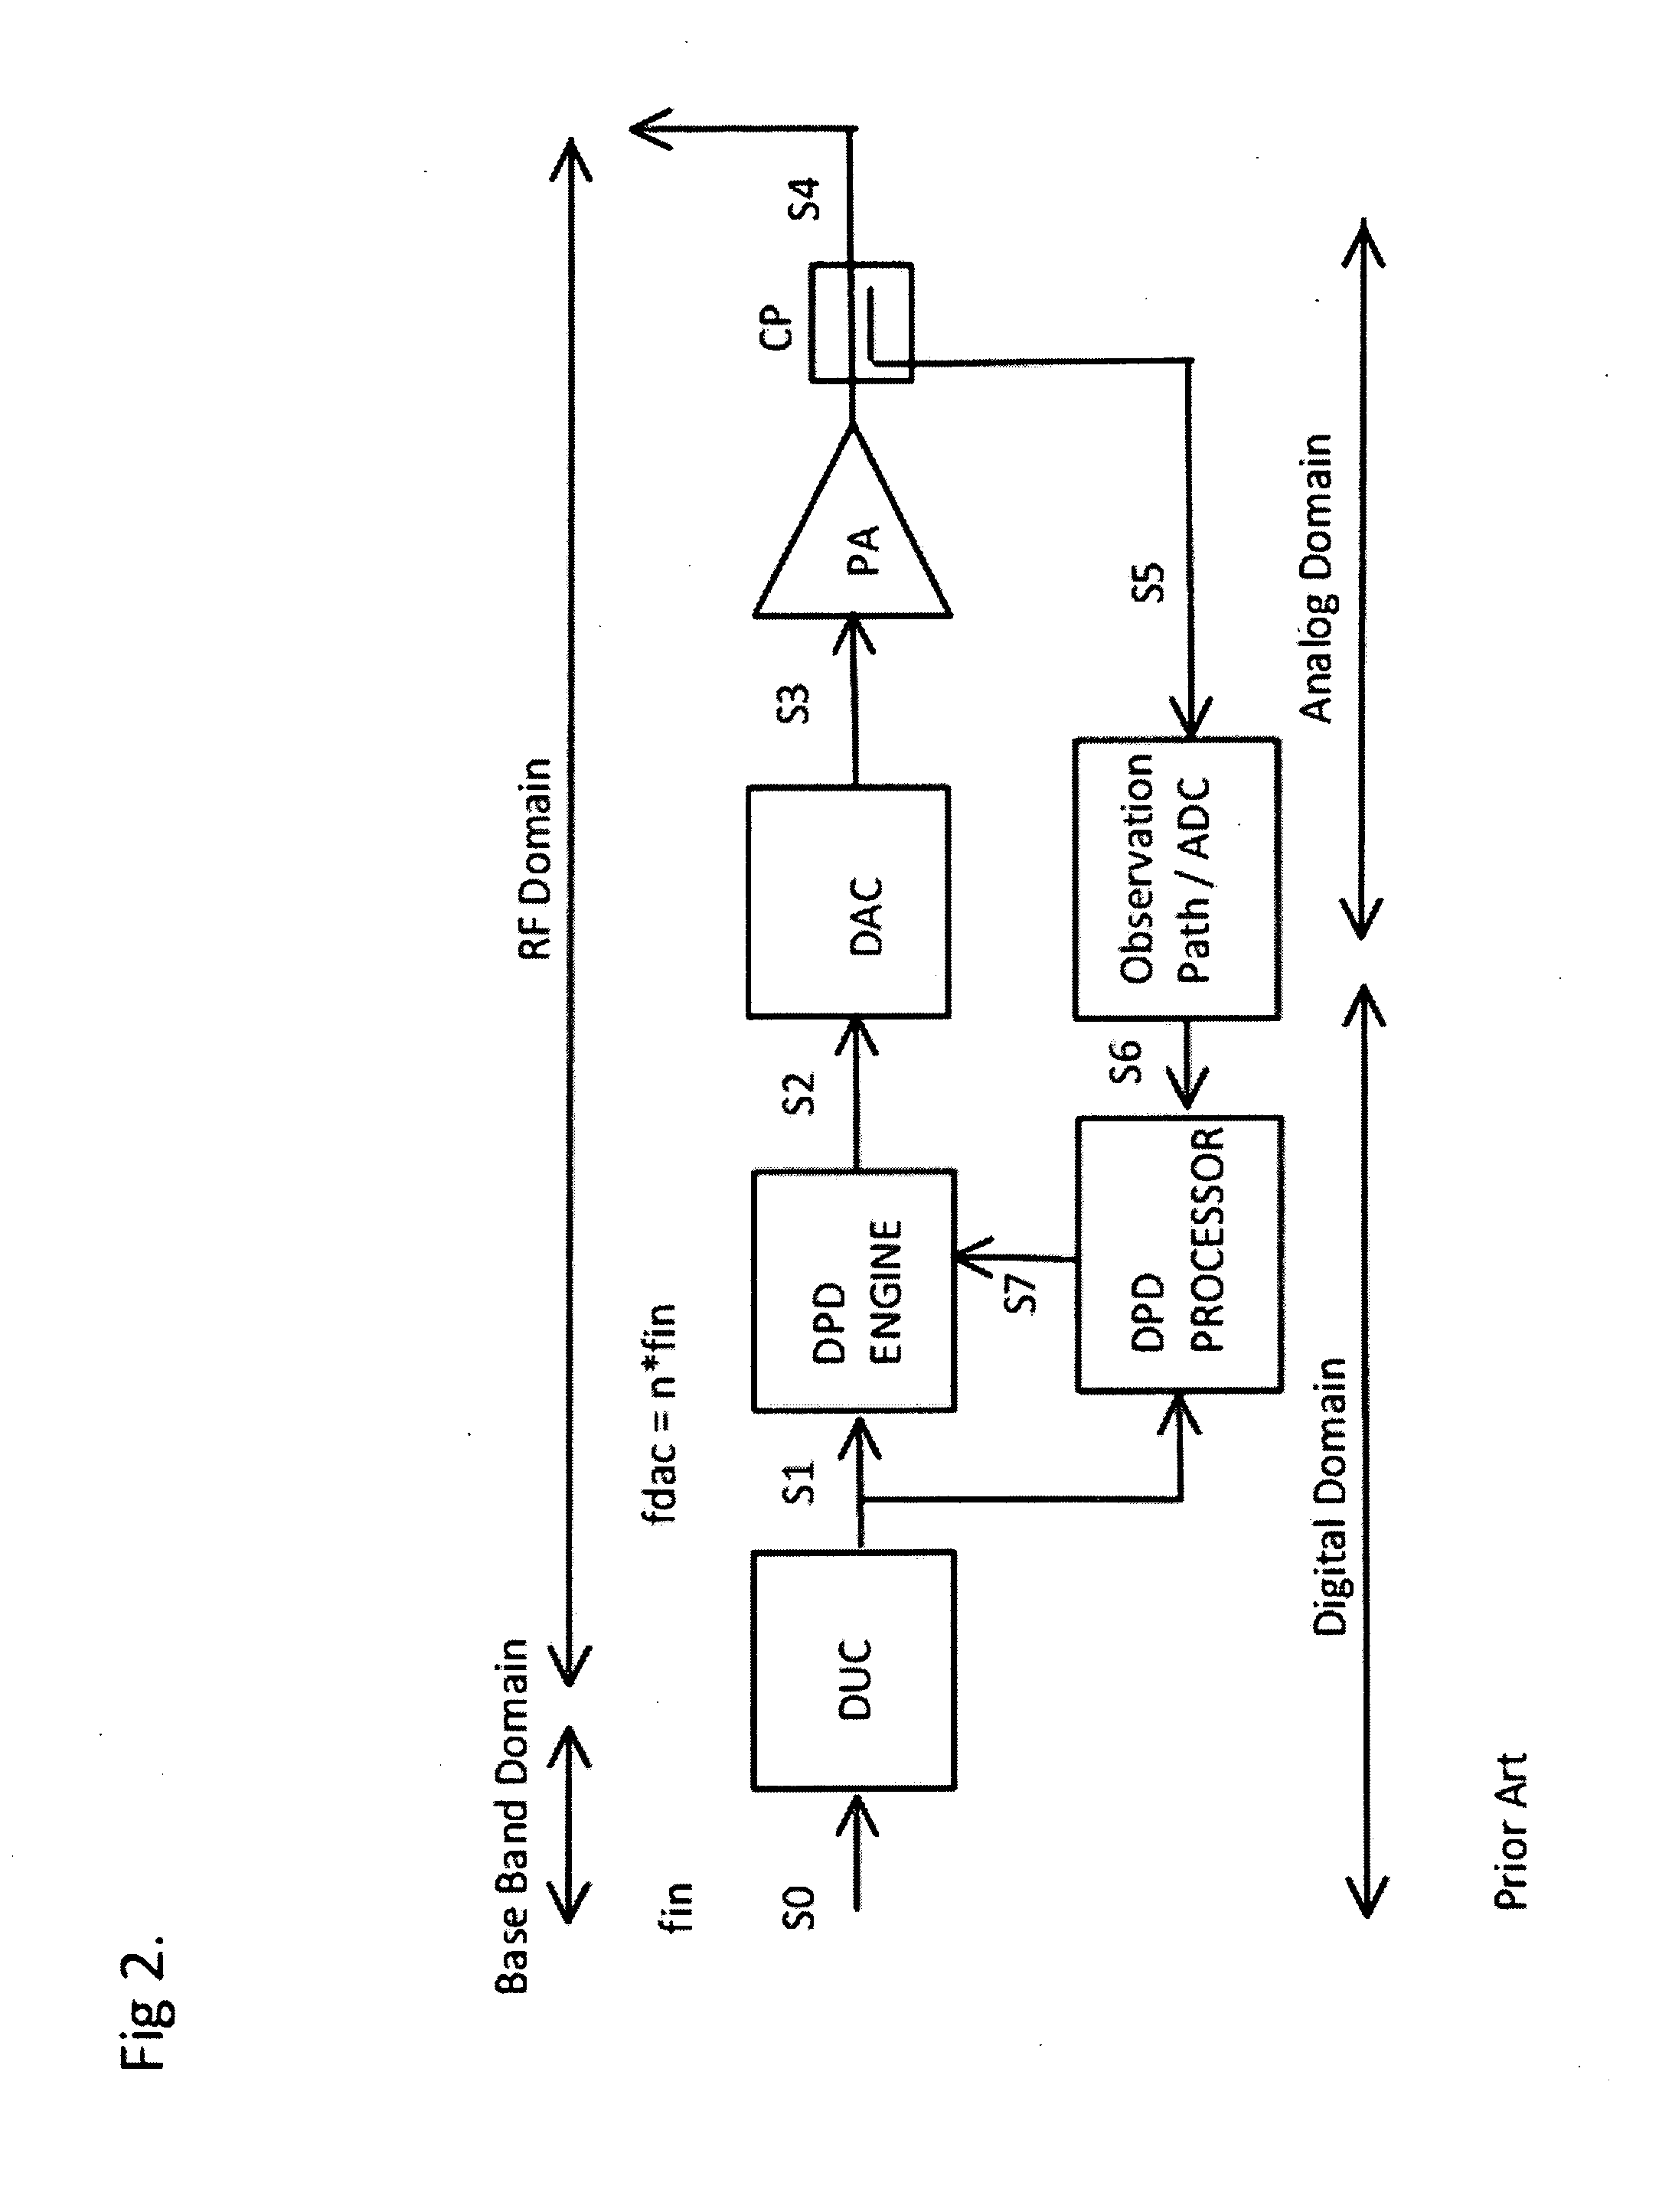 Methods, devices, and algorithms for the linearization of nonlinear time variant systems and the synchronization of a plurality of such systems